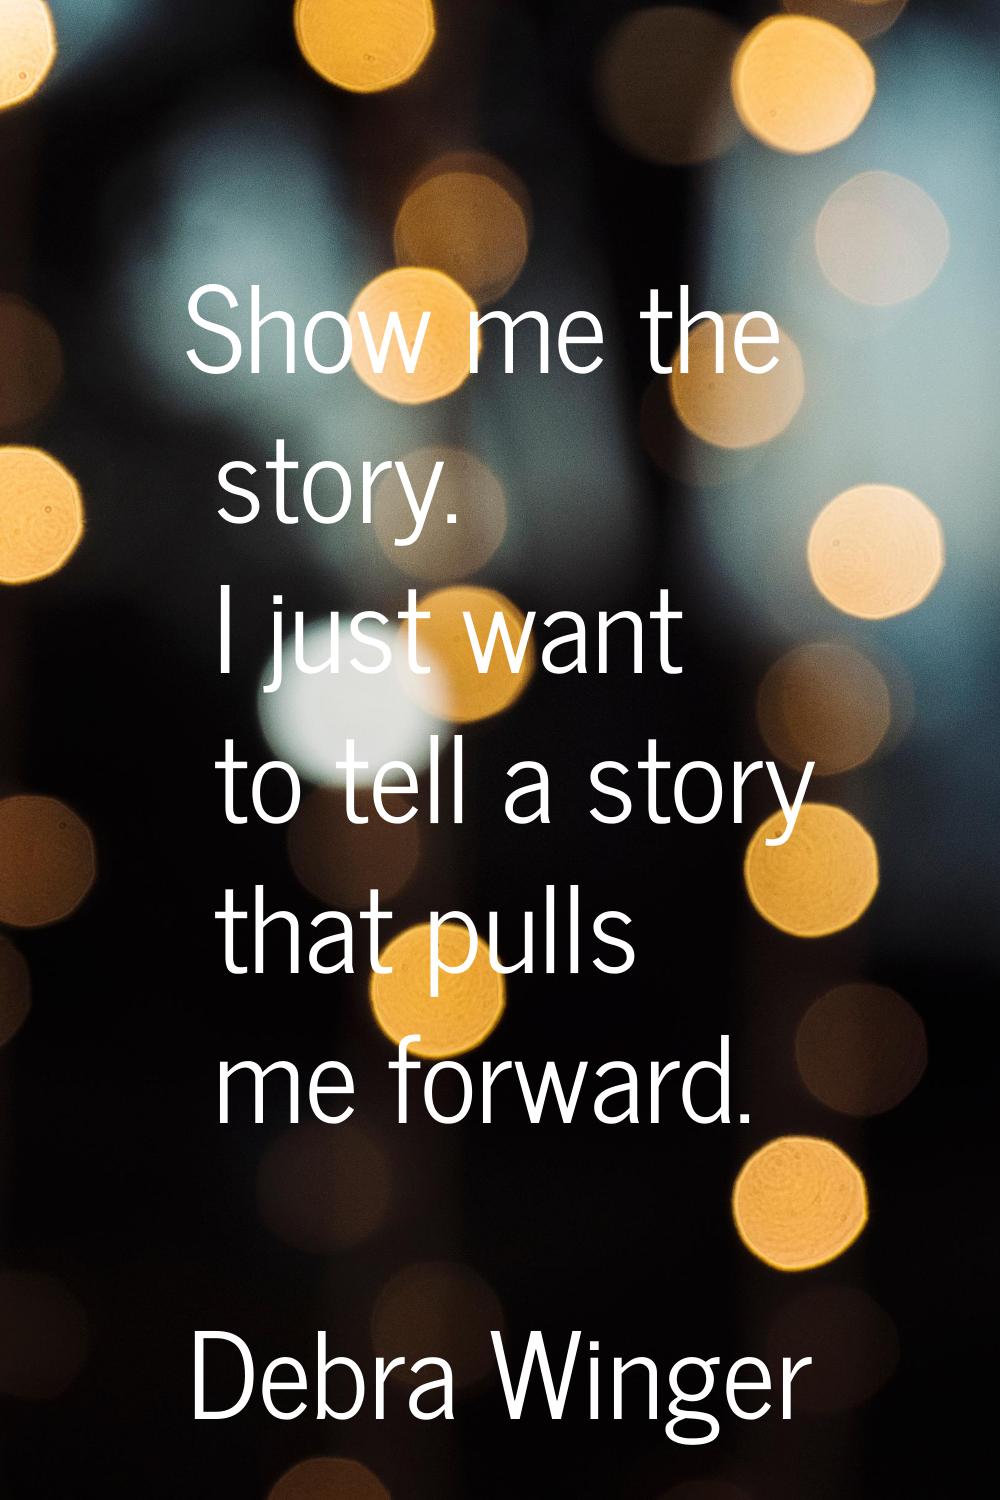 Show me the story. I just want to tell a story that pulls me forward.